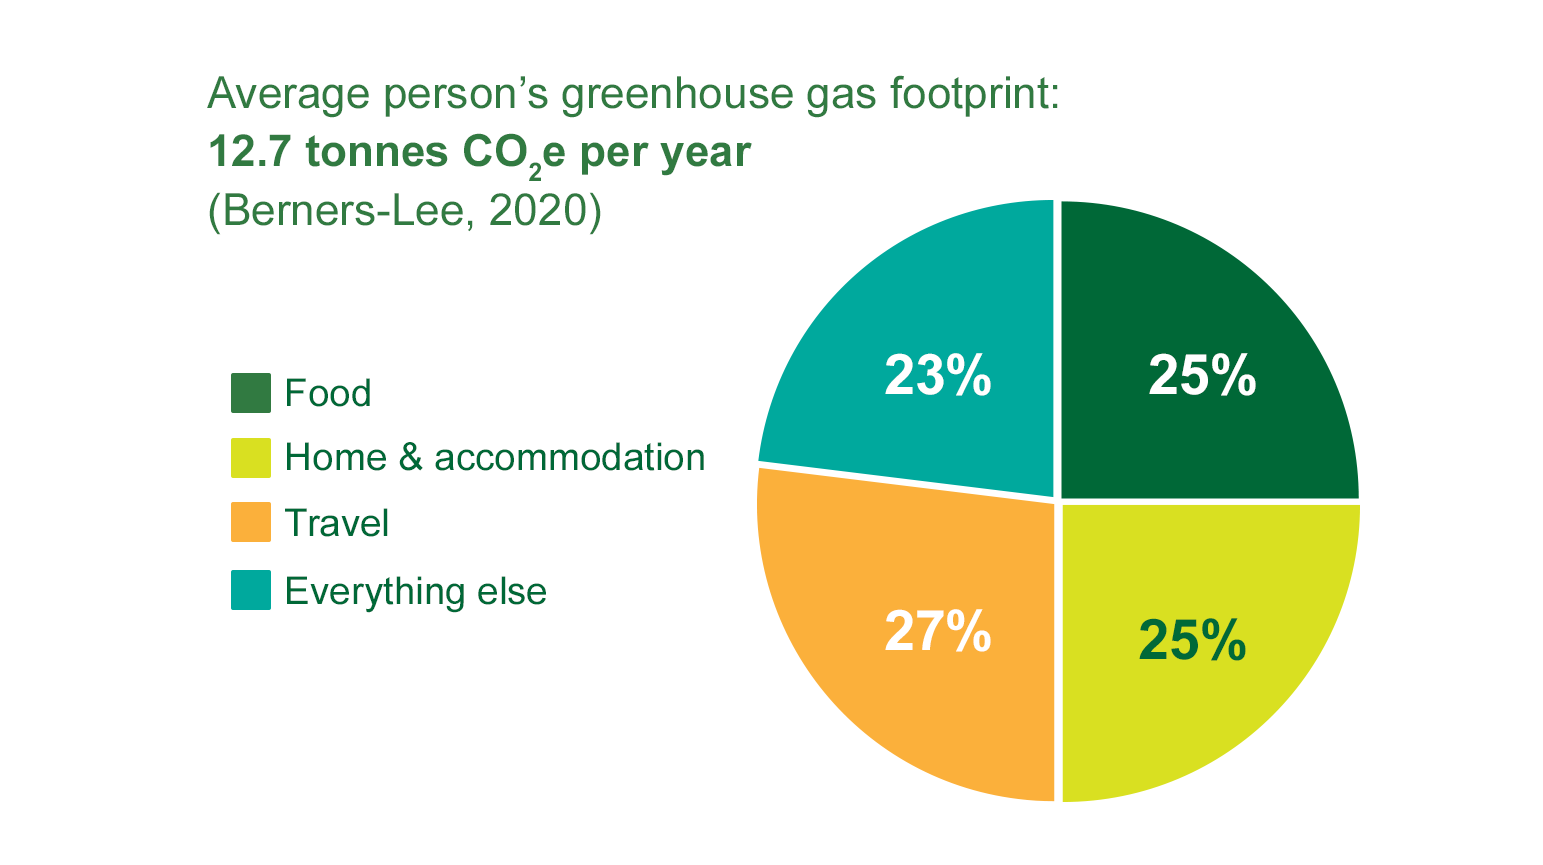 Pie chart showing average person's greenhouse gas footprint split by component e.g. Food, Travel.